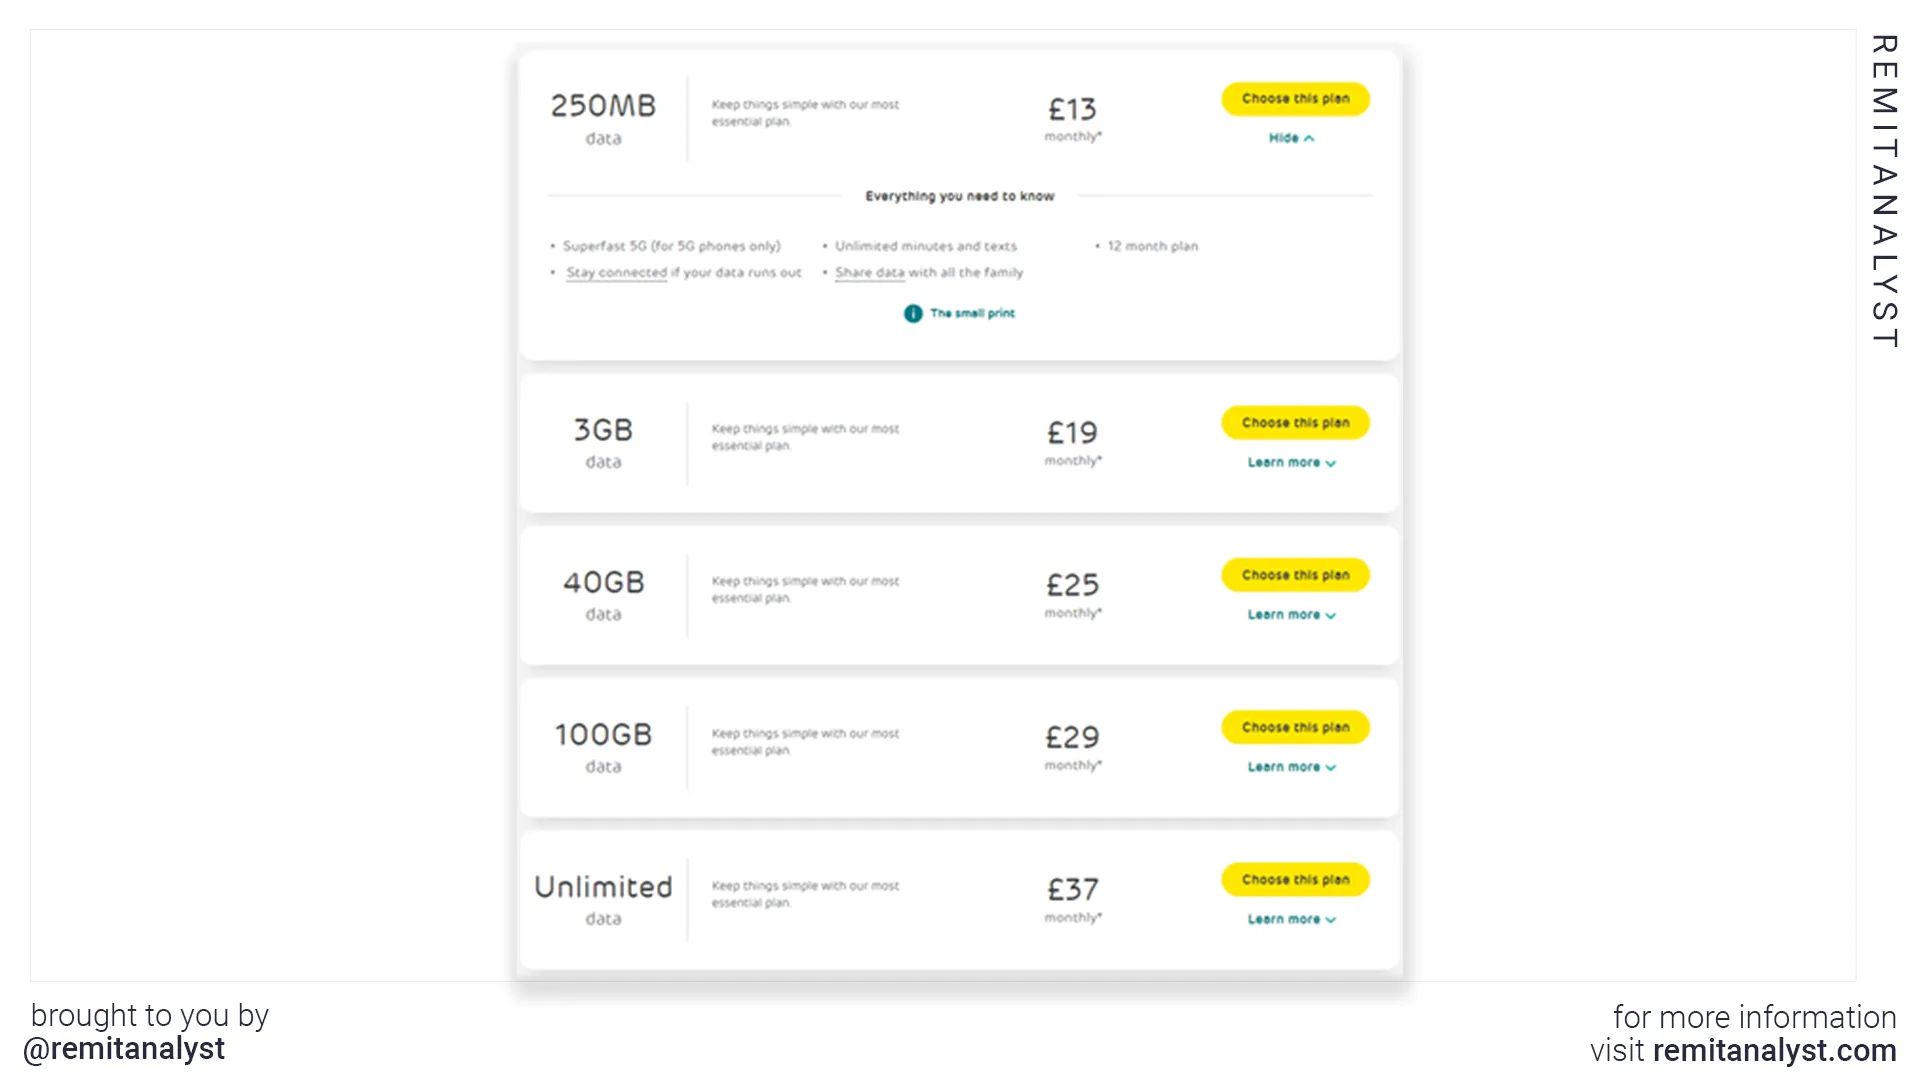 ee-mobile-plans-for-uk